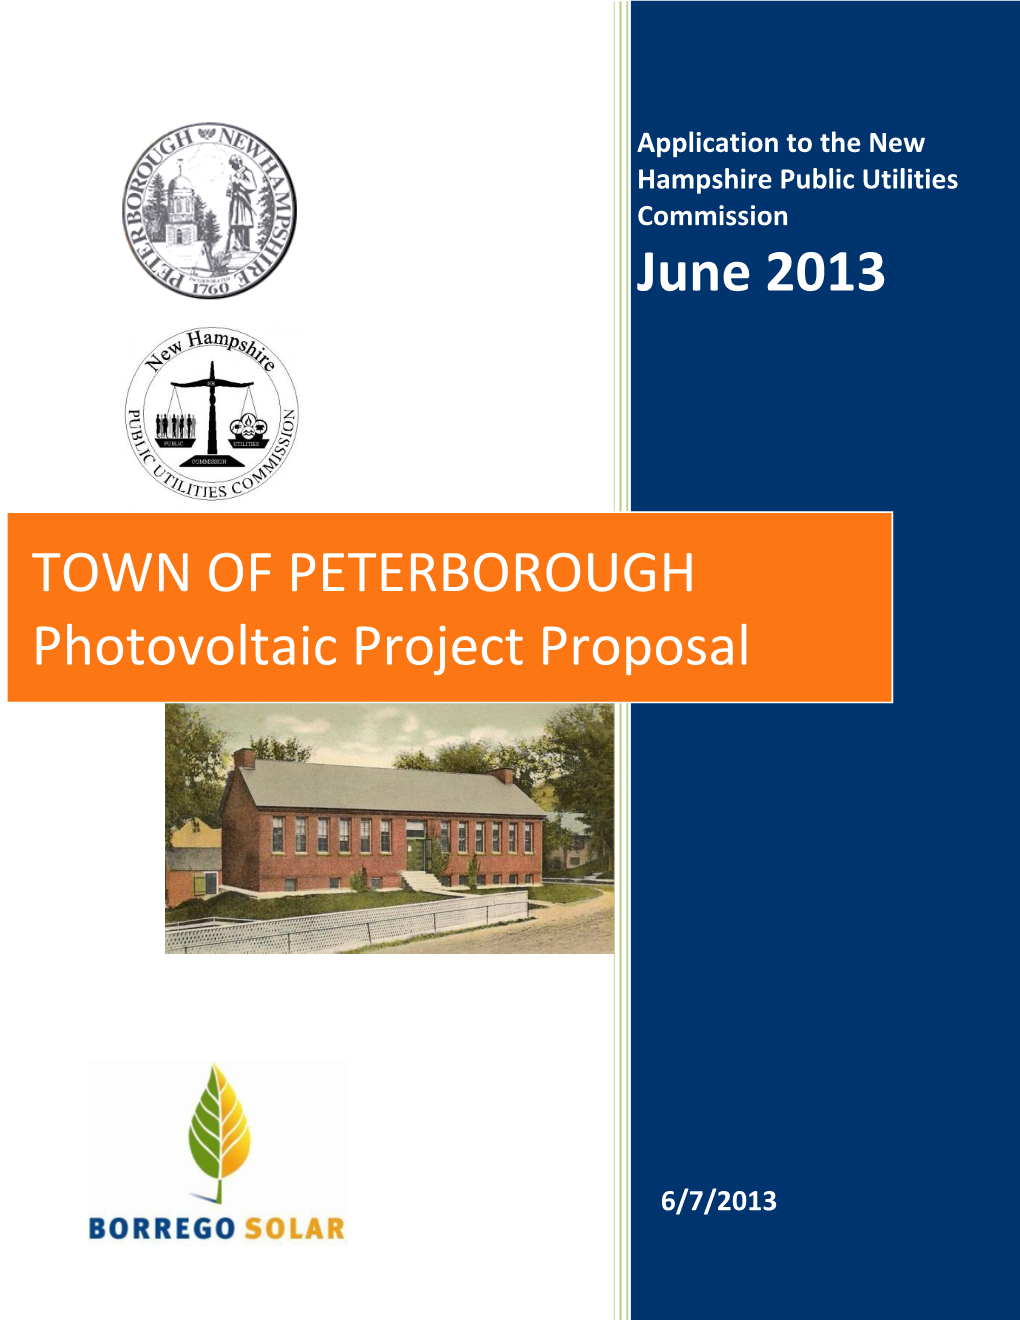 TOWN of PETERBOROUGH Photovoltaic Project Proposal